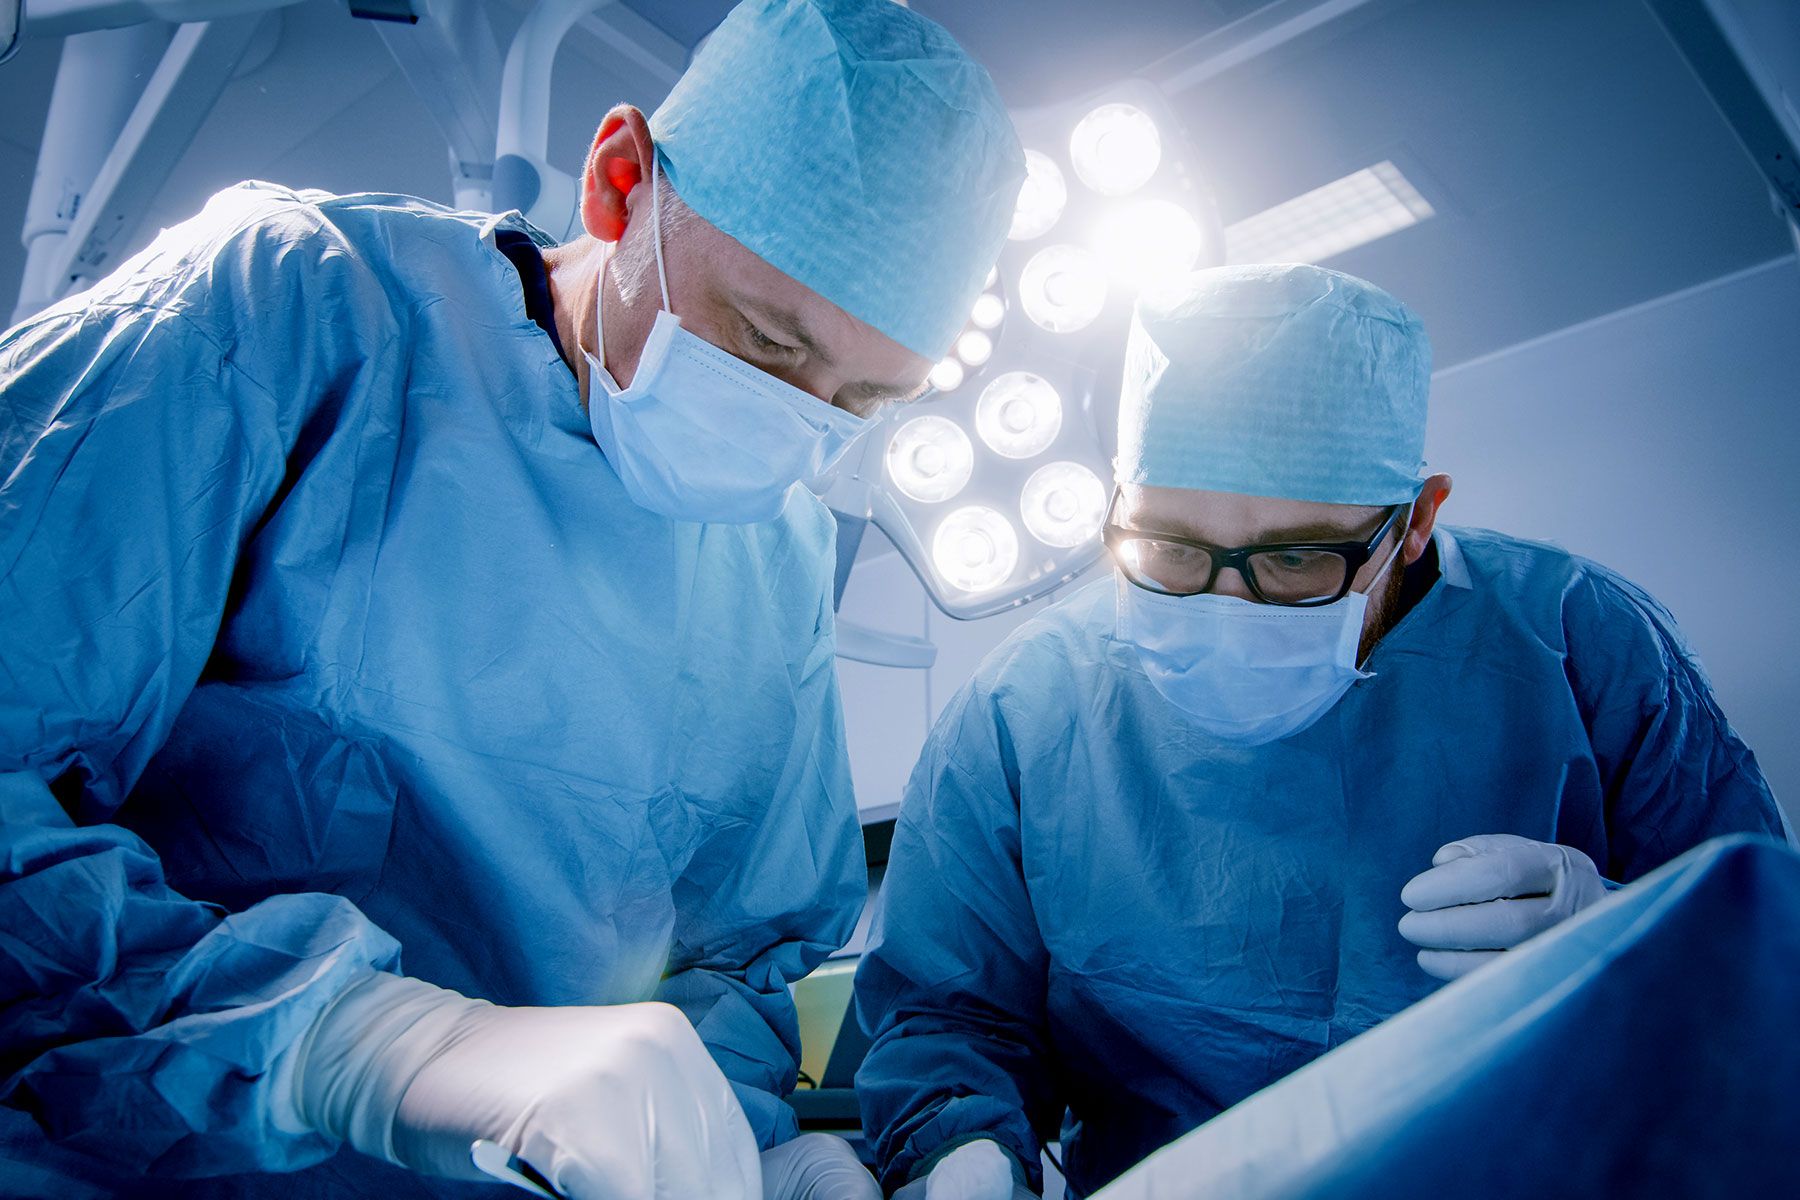 U.S. Kidney Transplant Outcomes Are Improving